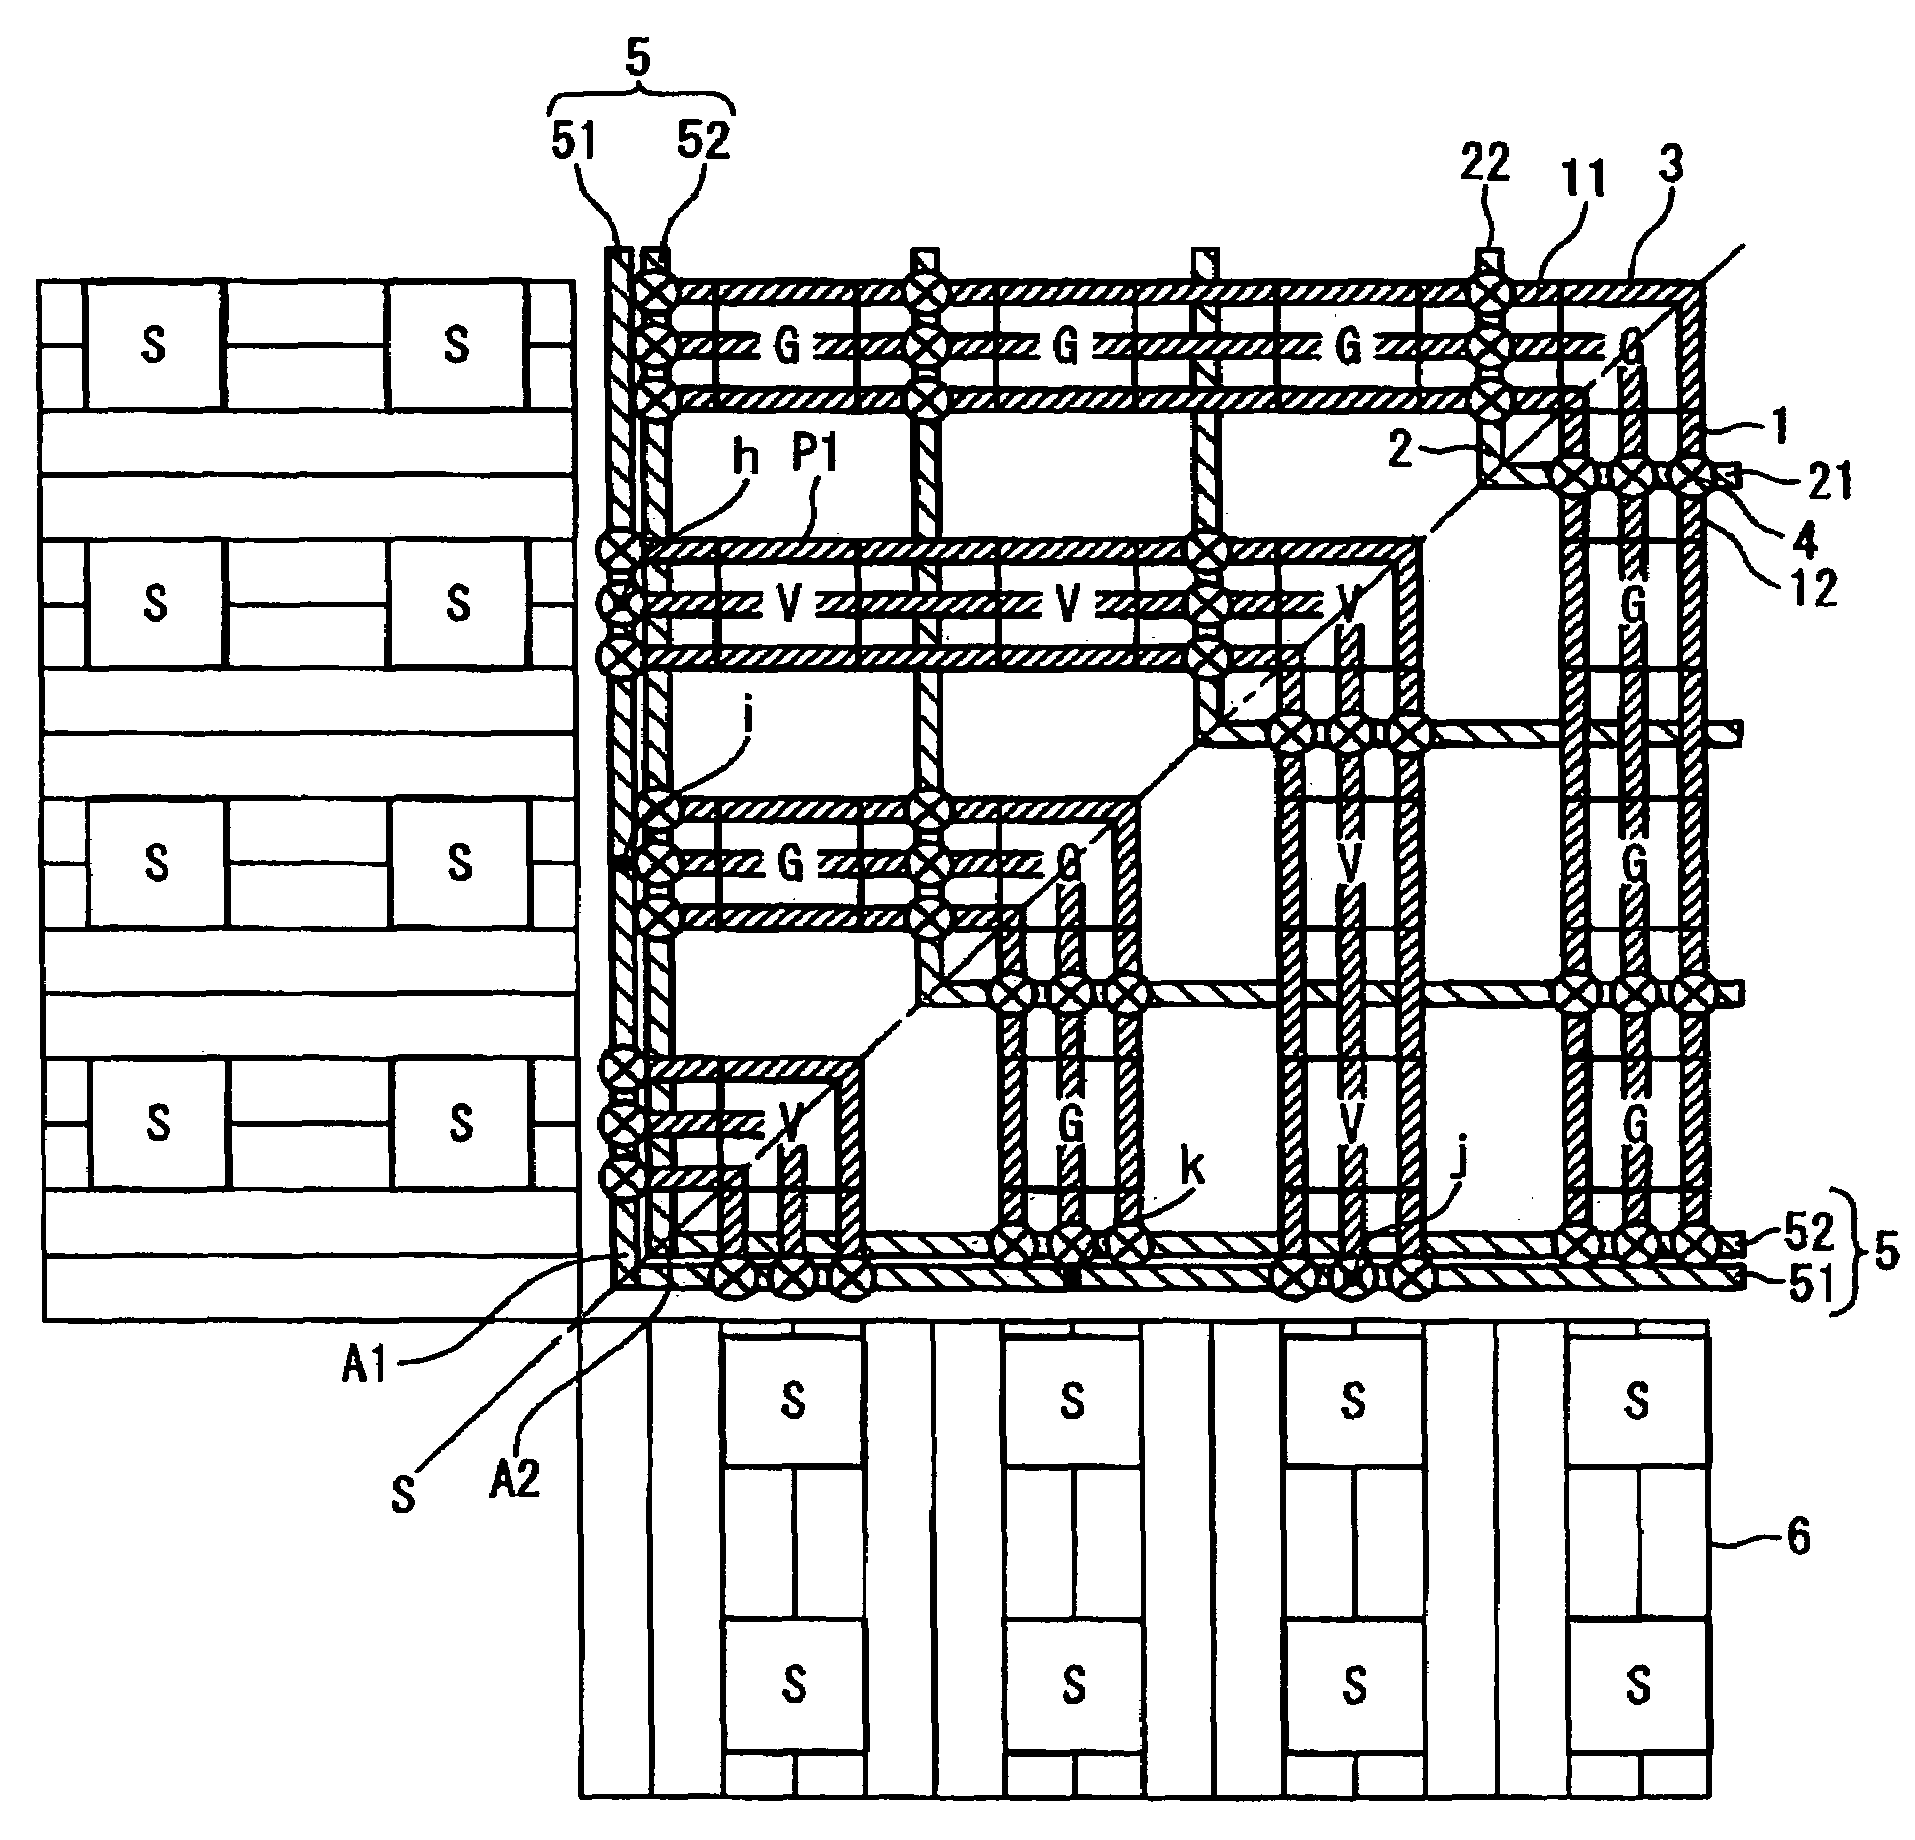 Flip-chip semiconductor device with improved power pad arrangement